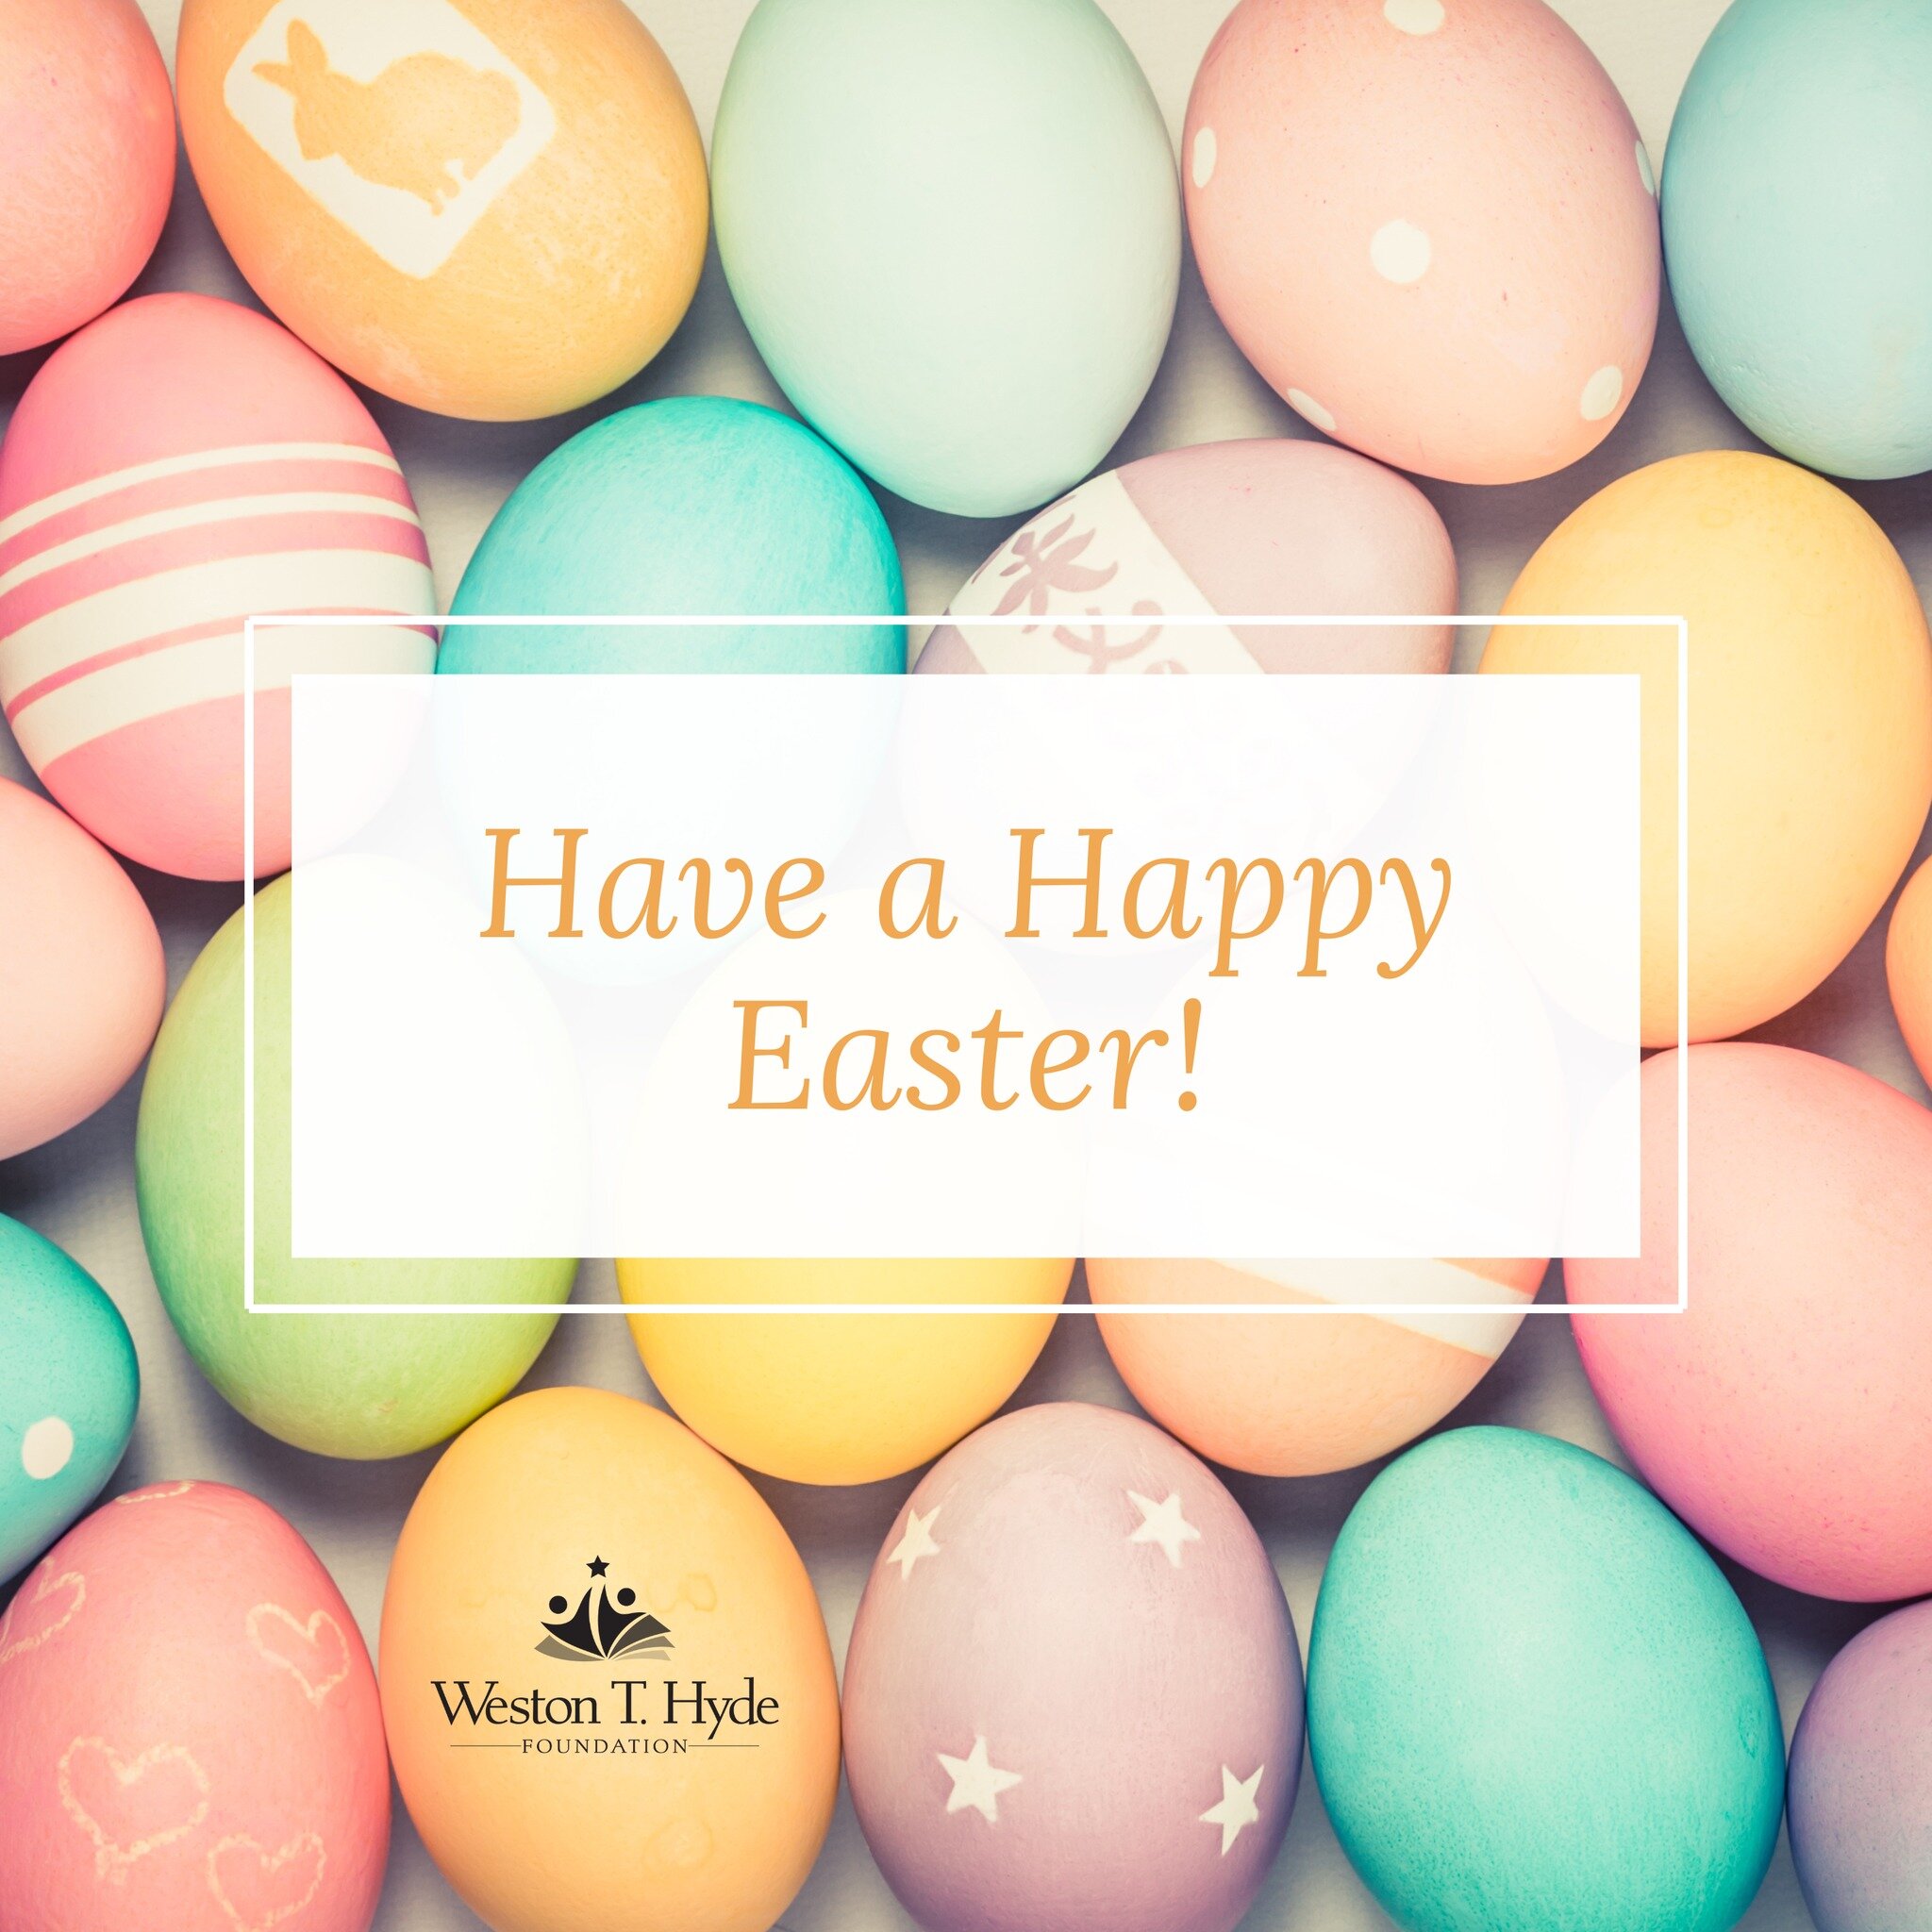 Wishing you a Happy Easter! 🐣🪺🐰